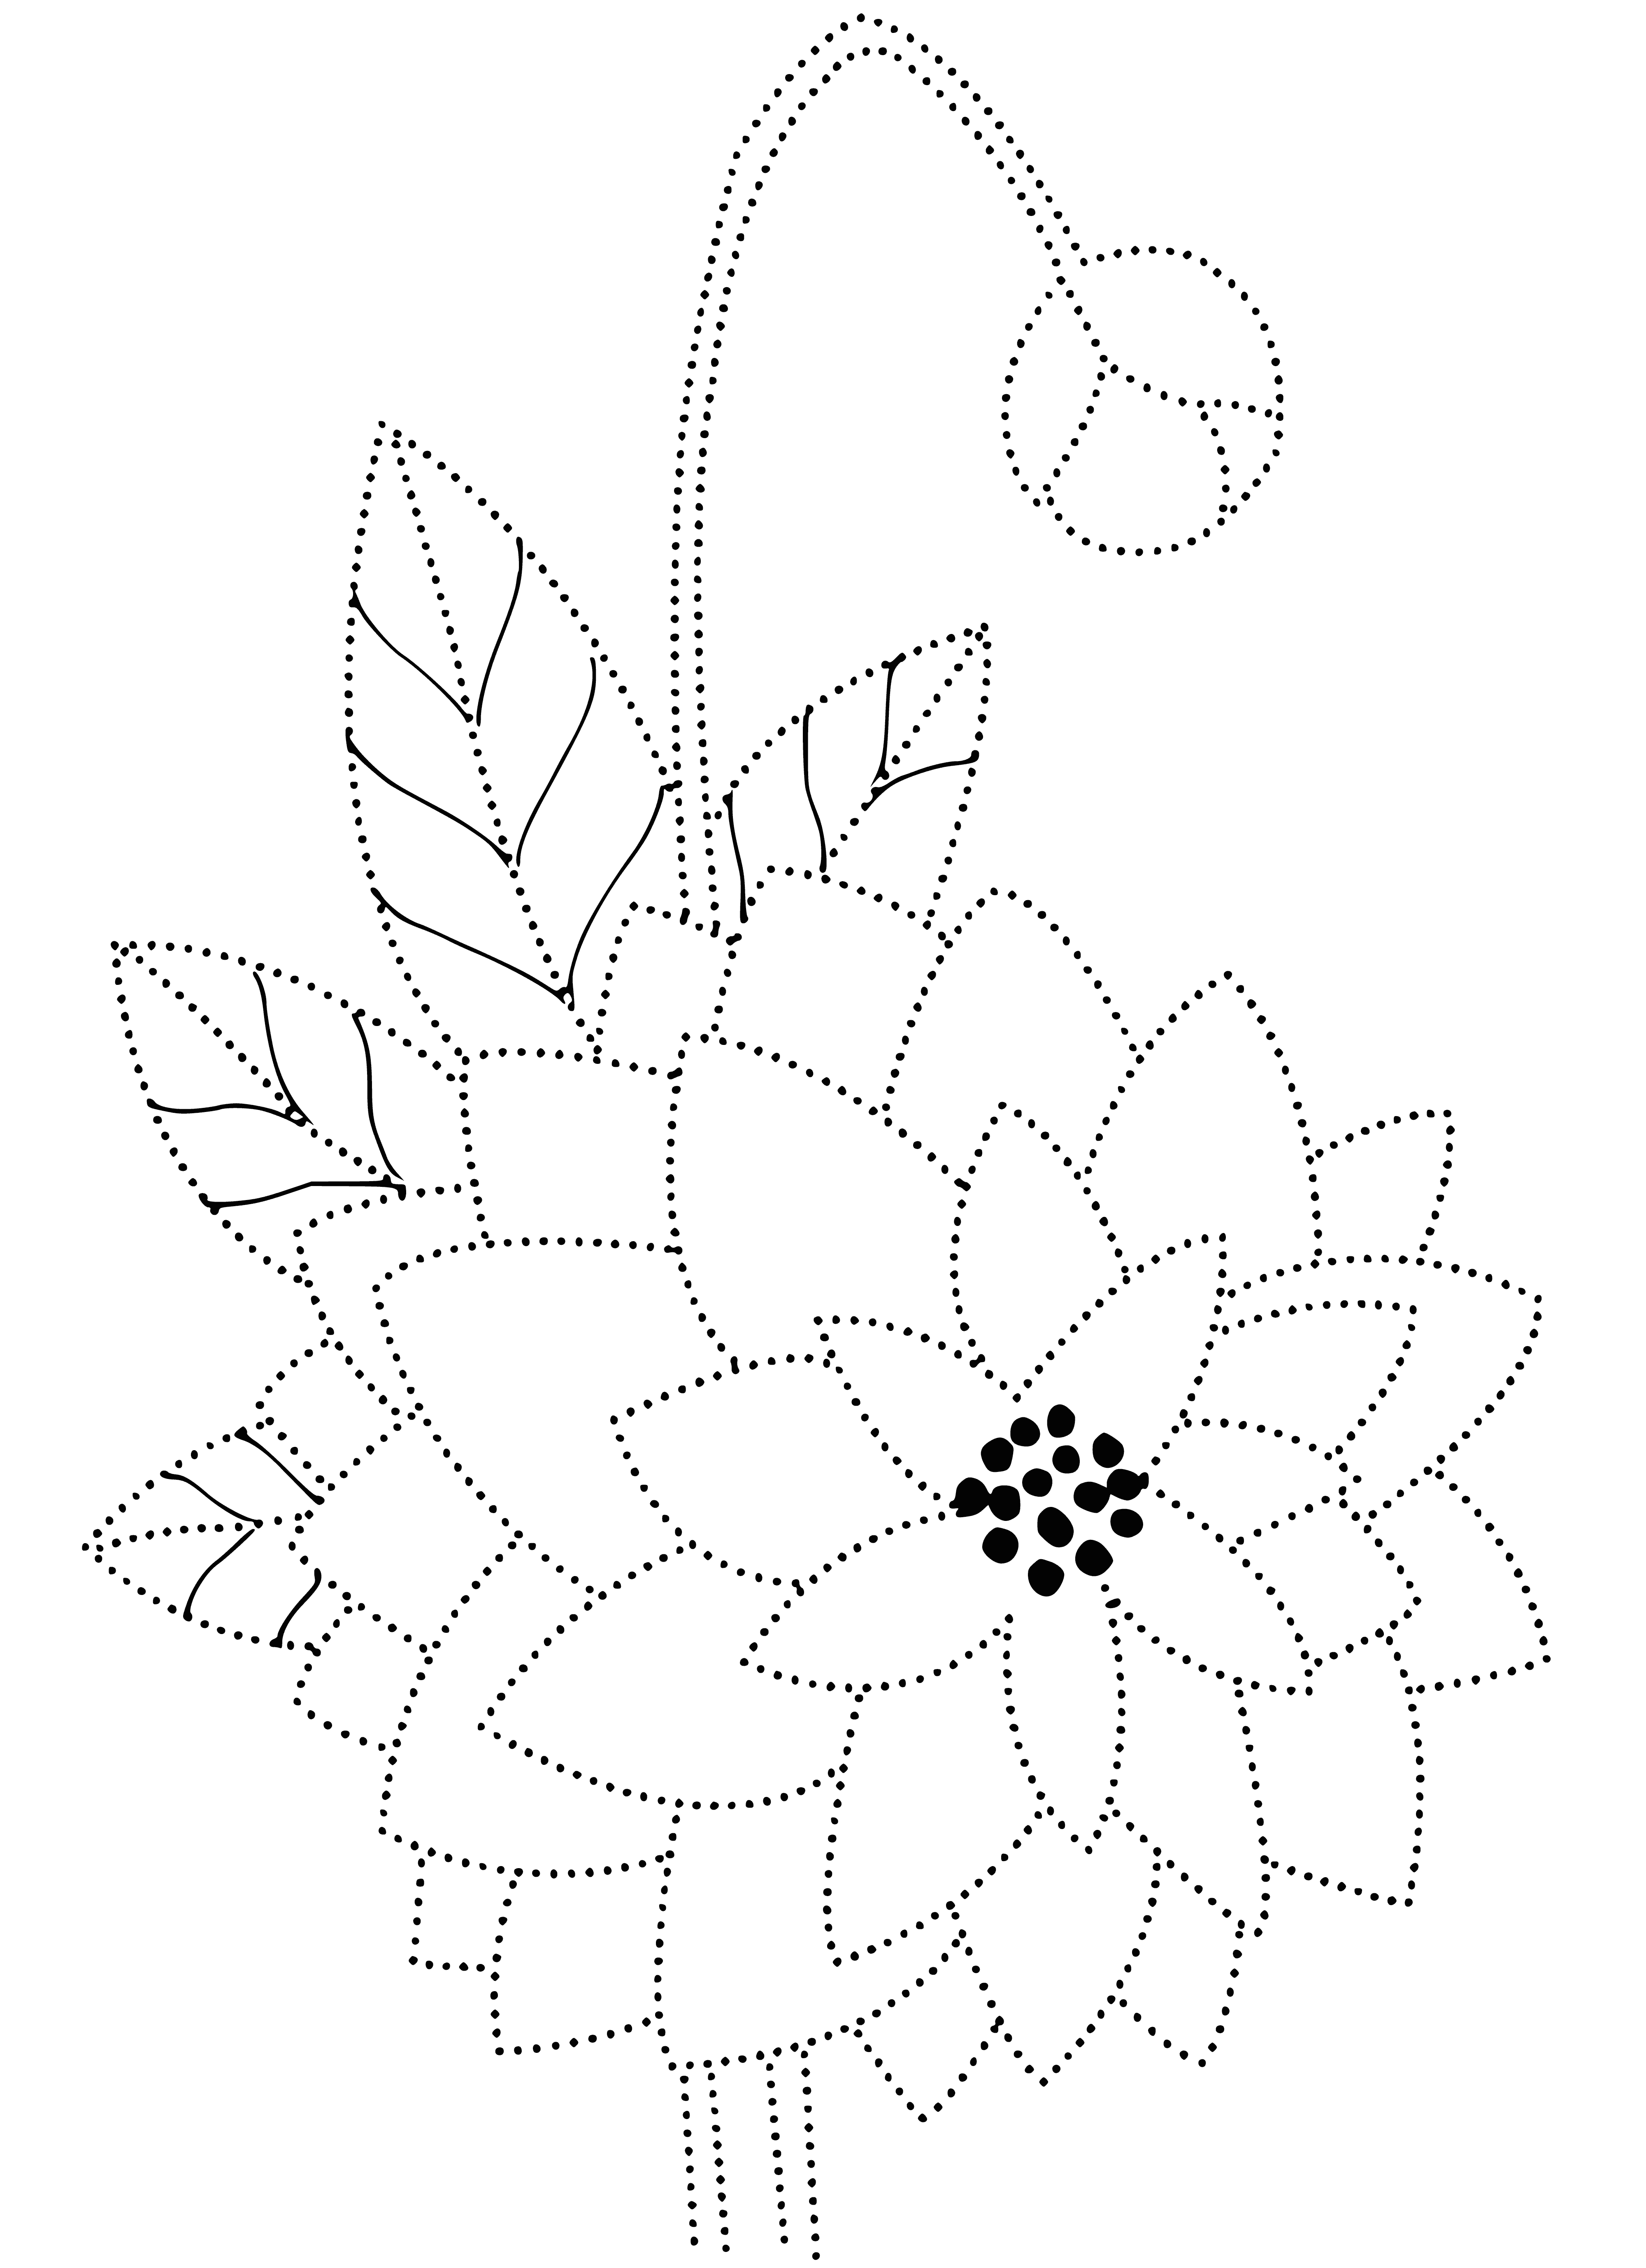 coloring page: Dahlias are a large, showy flower native to Mexico w/ petals ruffled & varying in color. They prefer full sun & well-drained soil for growth.